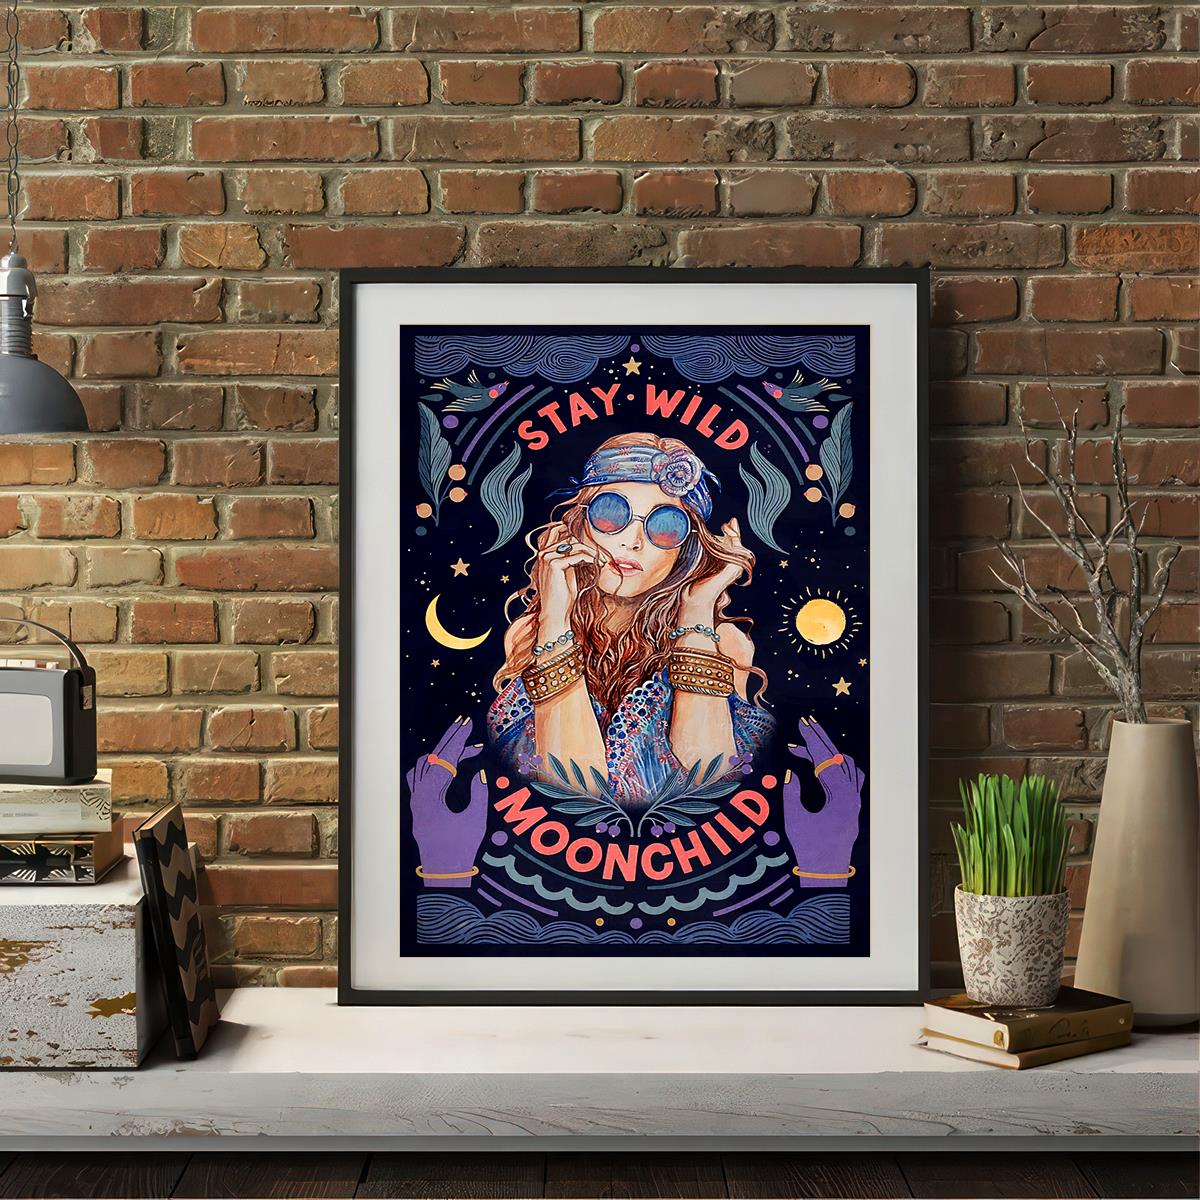 1pc Retro Canvas Painting Print Poster, Inspirational Yoga Girl Gypsy Let  That Shit Go Stay Wild Moon Child Wall Art, For Home Decor Room Decor Canvas